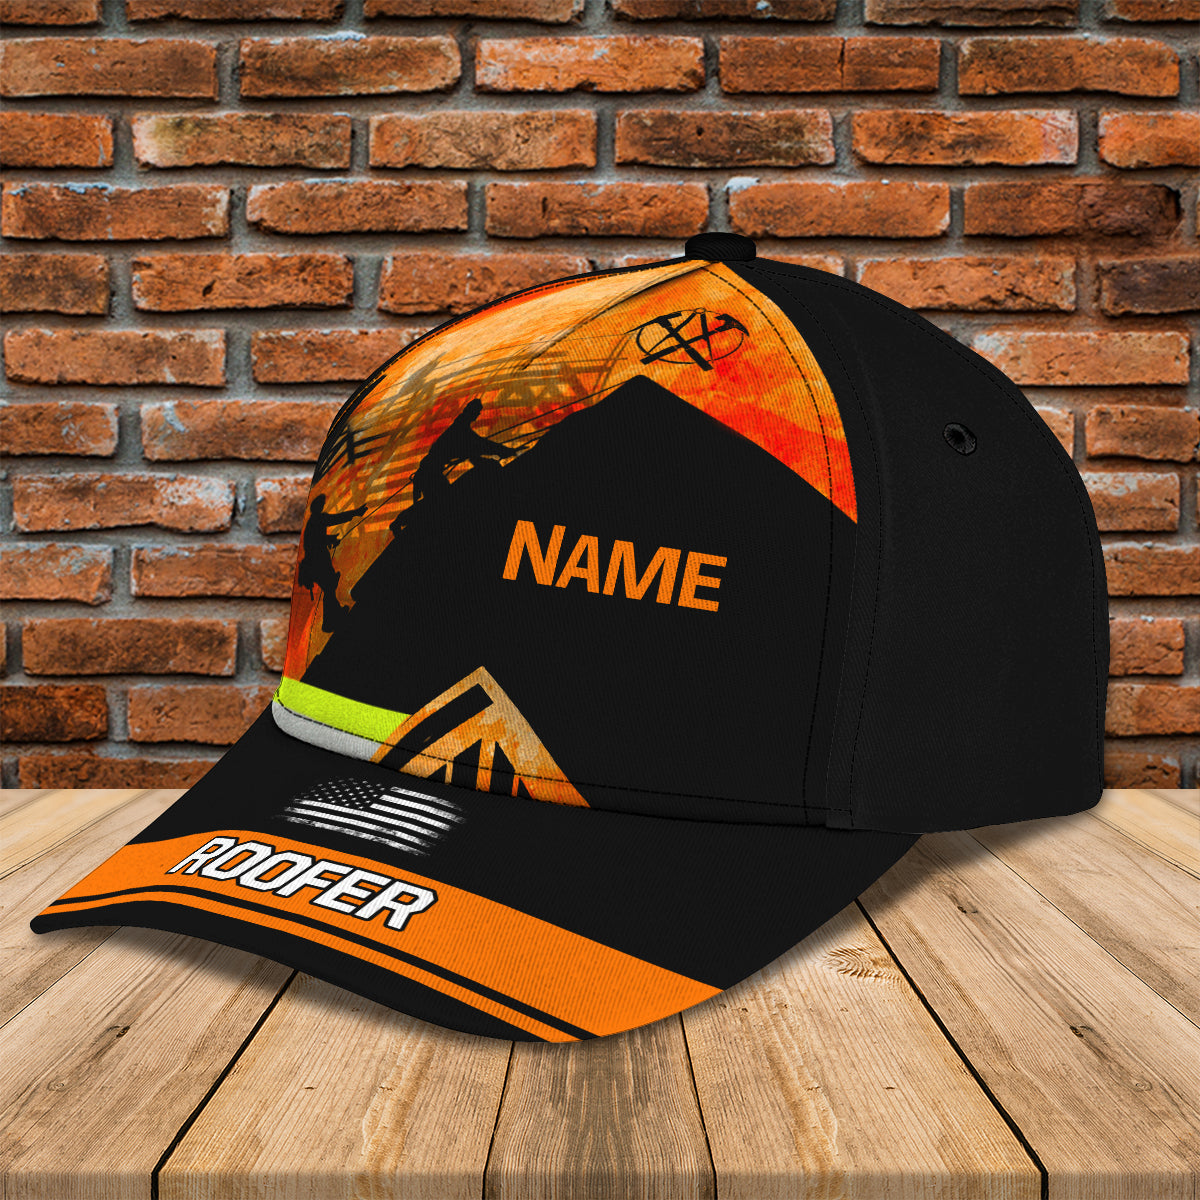 Roofer 2 Hd98- Personalized Name Cap -Loop- Hd98 37